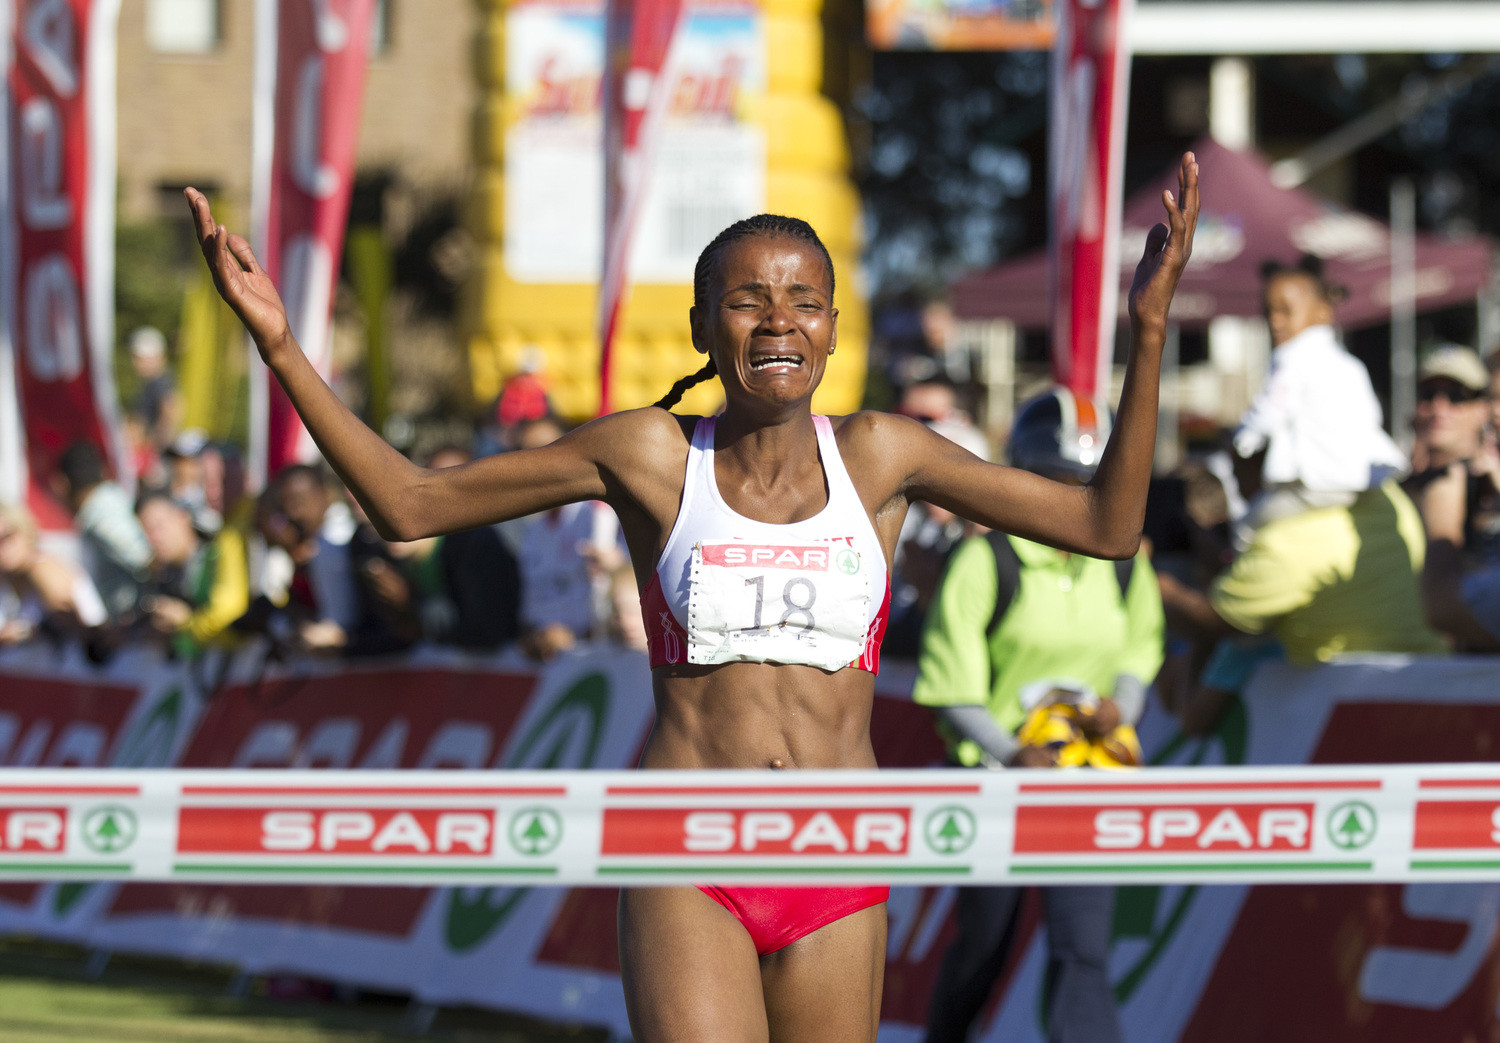 Cape Town Marathon is my ticket for Tokyo Marathon, the South Africa twin Lebogang Phalula says 